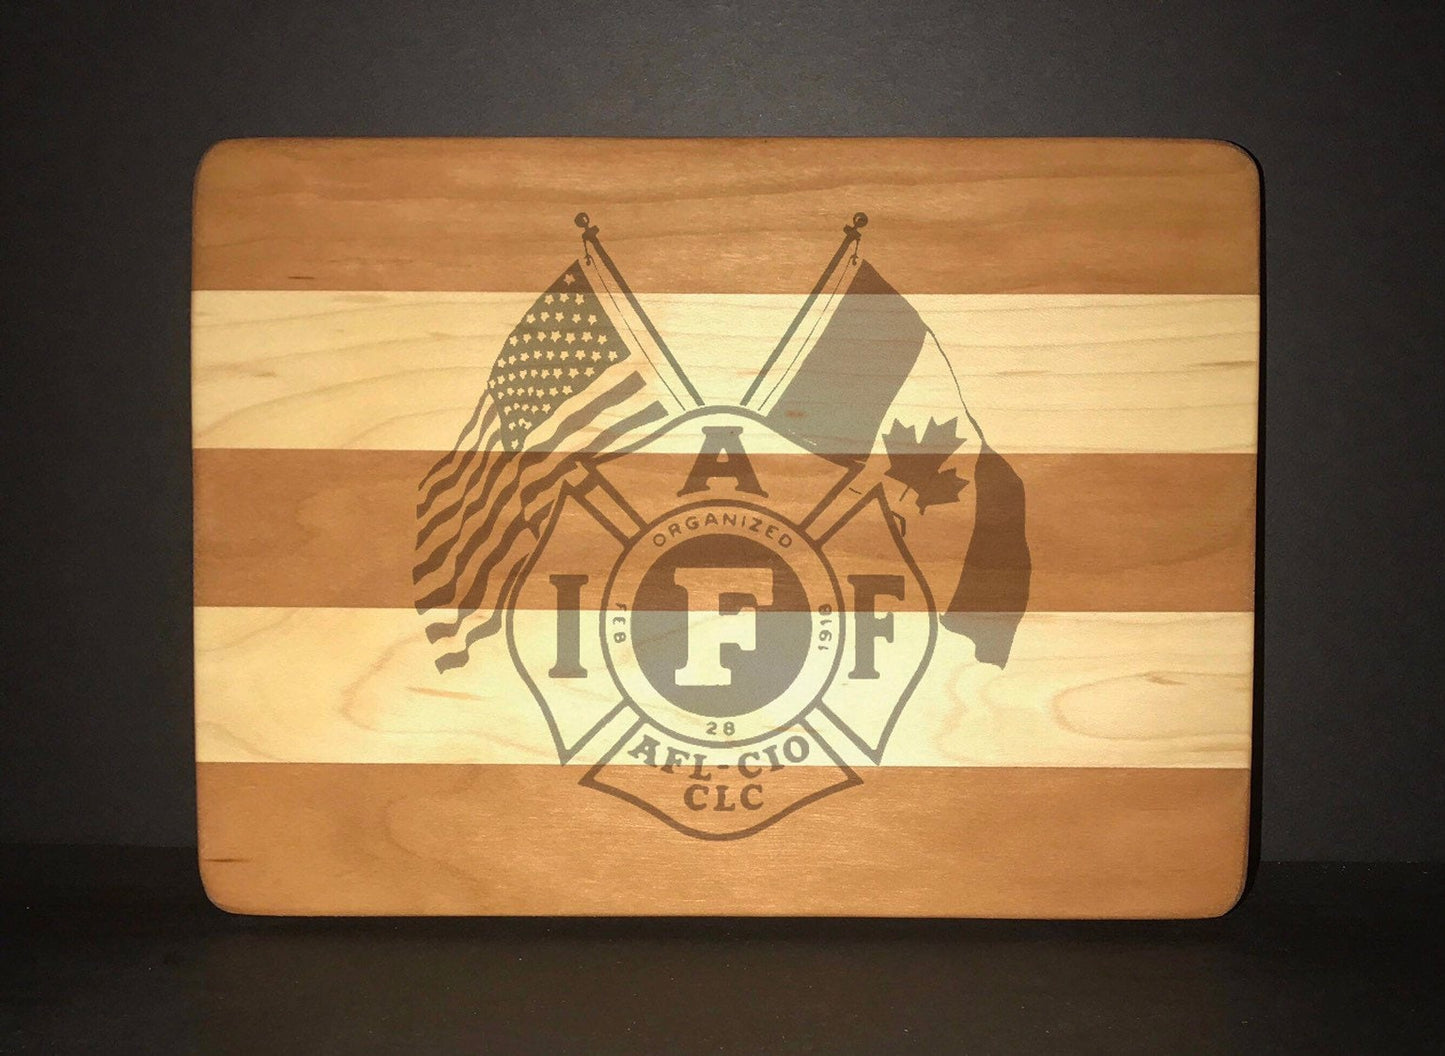 IAFF Officially Licensed 8”X10” Cuttingboards Made Out Of Cherry and Maple (7X9 & 12”X14” Also Available)